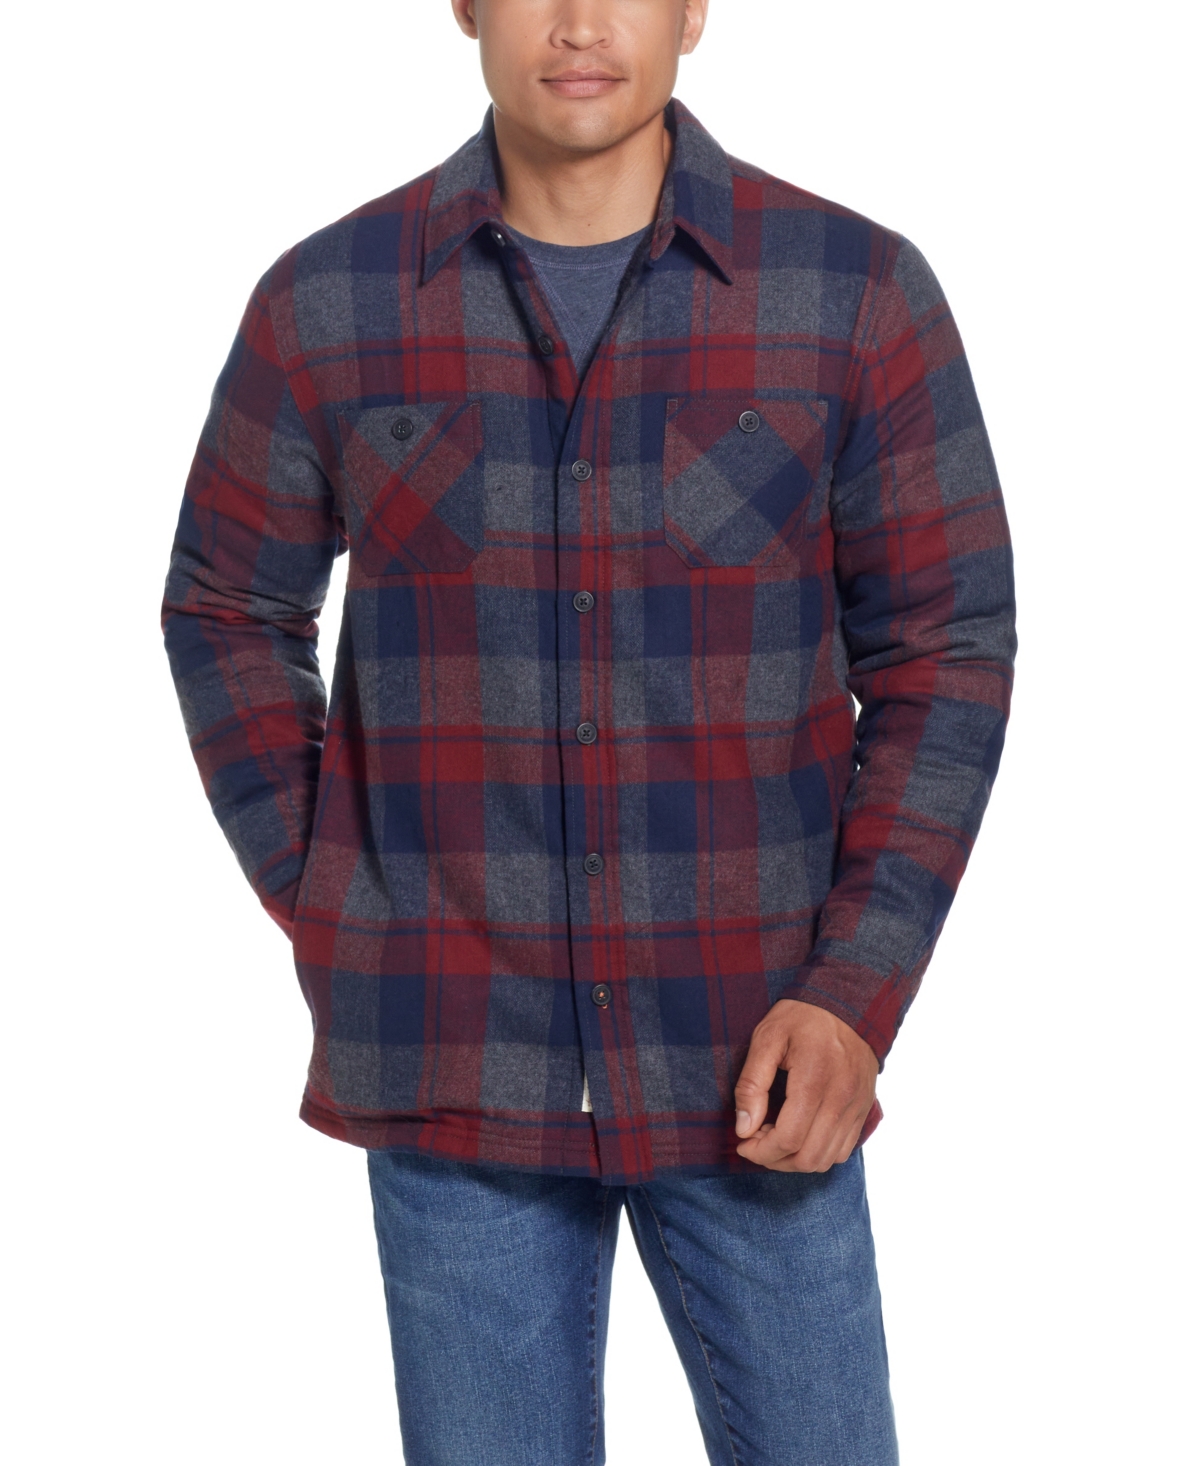 Men's Sherpa Lined Flannel Shirt Jacket - Red Dahlia